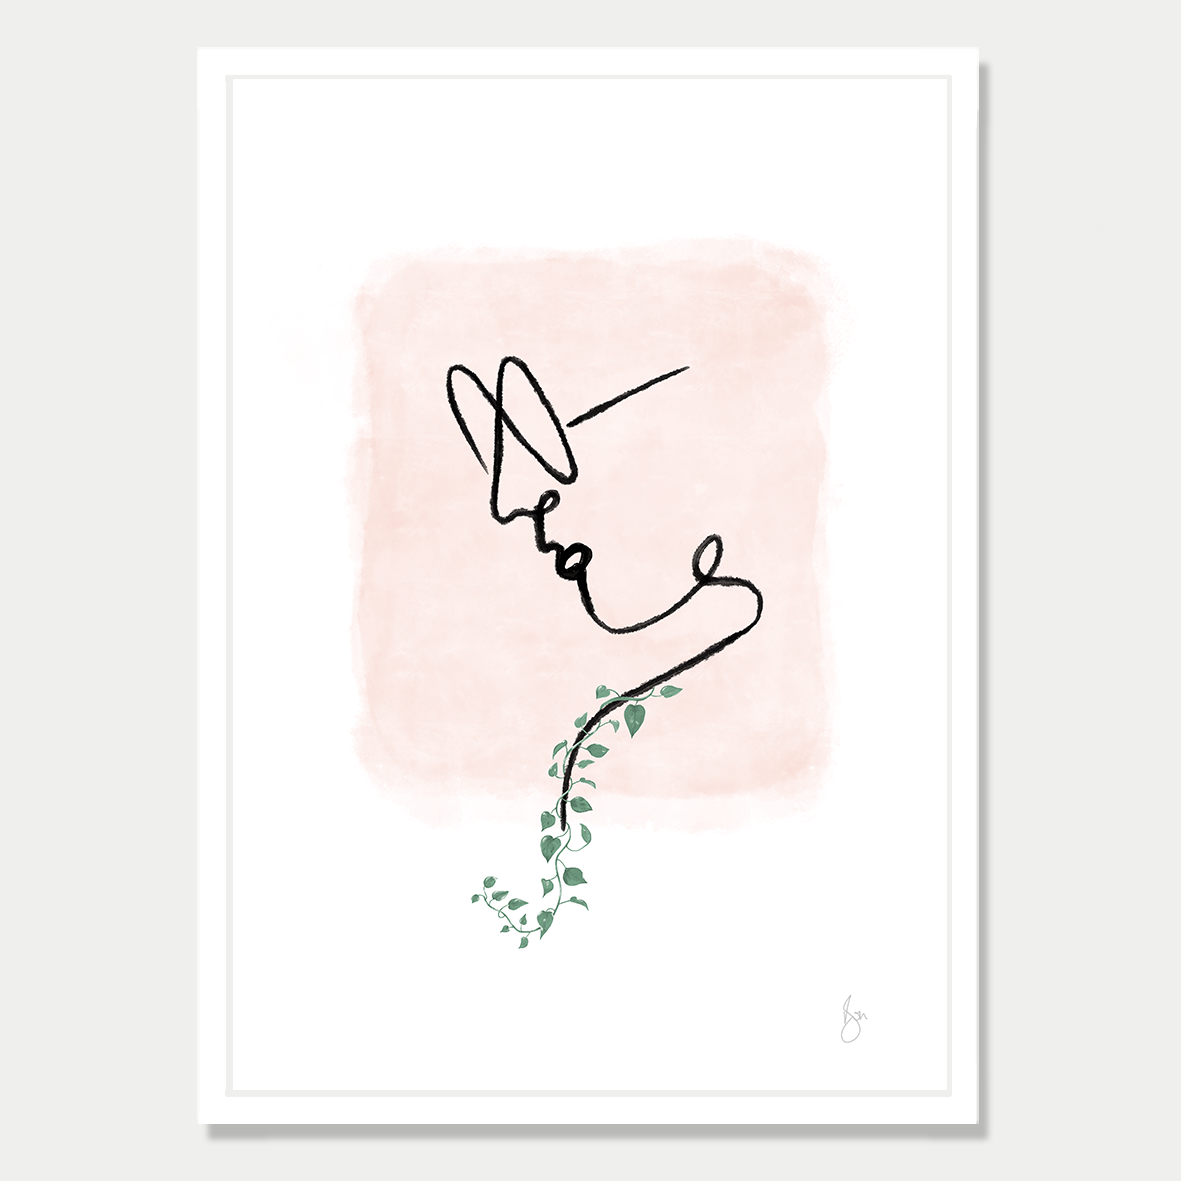 This art print is a line drawing on a woman wearing large glasses and has a single vine growing from her shoulder, by Bon Jung. Printed in New Zealand by endemicworld and framed in whilte.